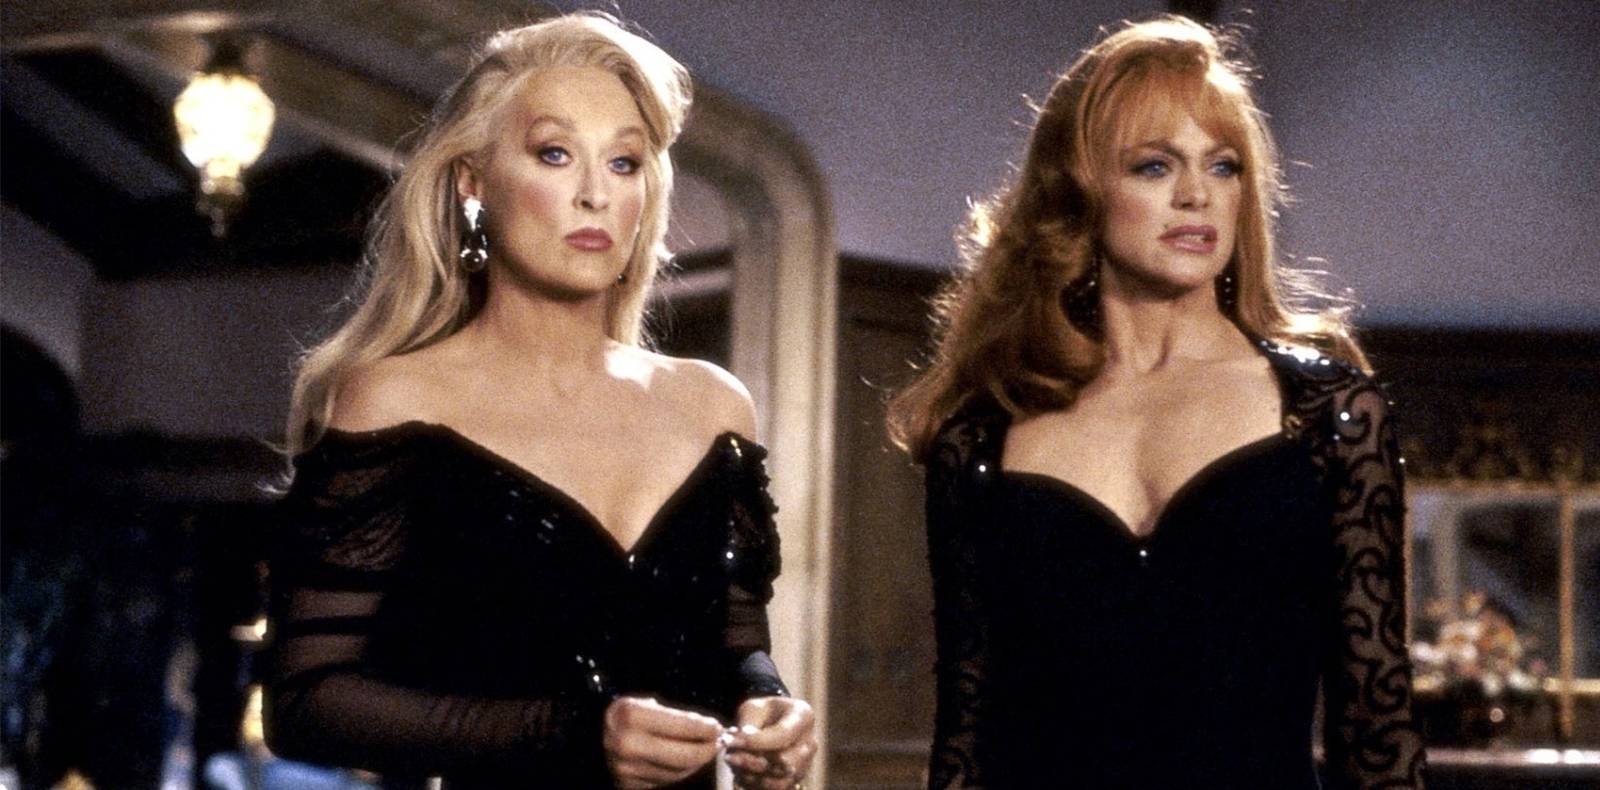 Goldie Hawn and Meryl Streep in “Death Suits You So Well” (1992) Robert Zemeckis